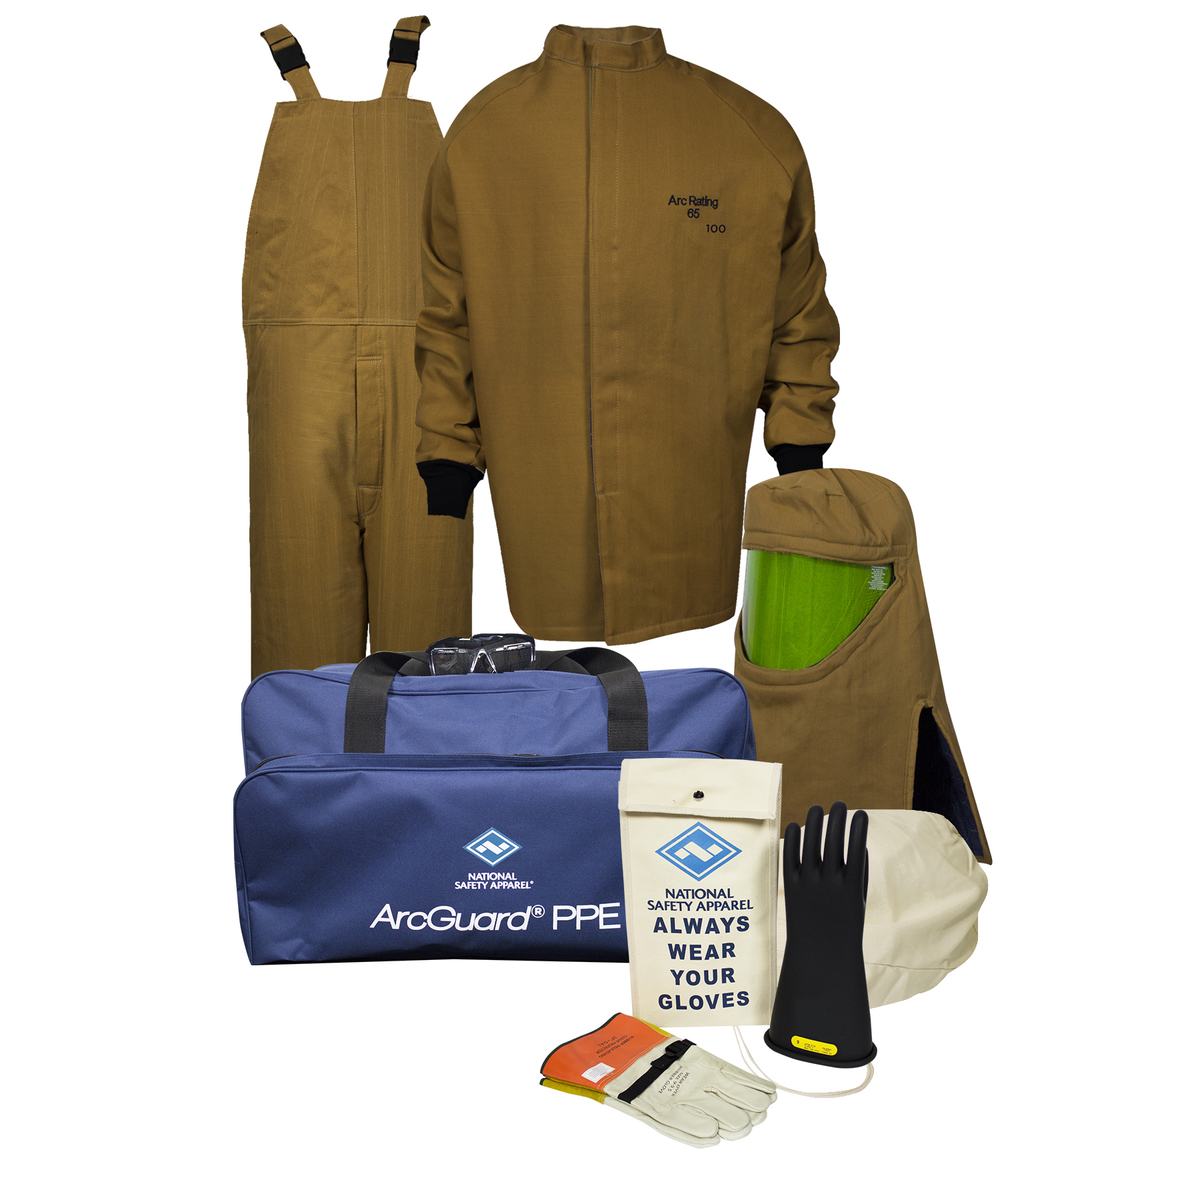 National Safety Apparel 2X Brown DuPont™ Nomex®/Kevlar® ArcGuard® Flame Resistant Arc Flash Personal Protective Equipment Kit Wi